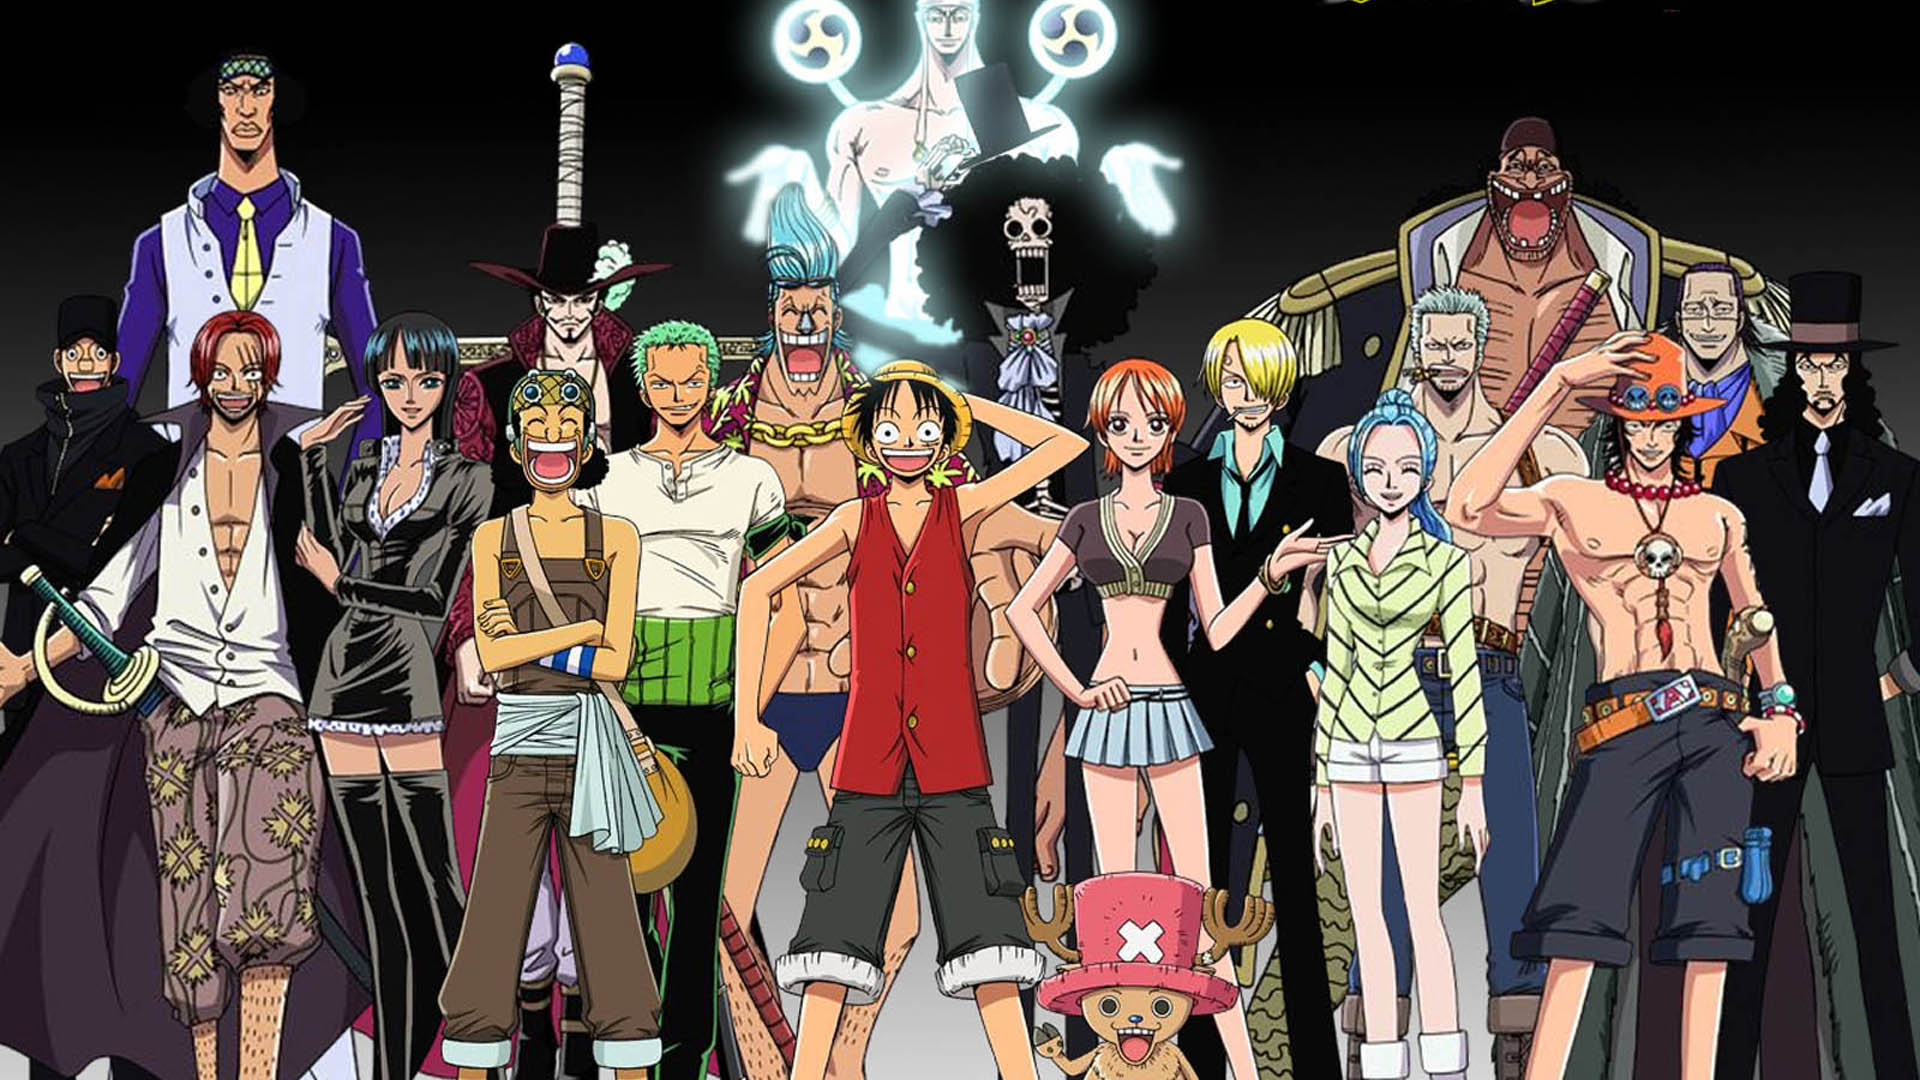 The strength of one piece Image - ID: 152670 - Image Abyss